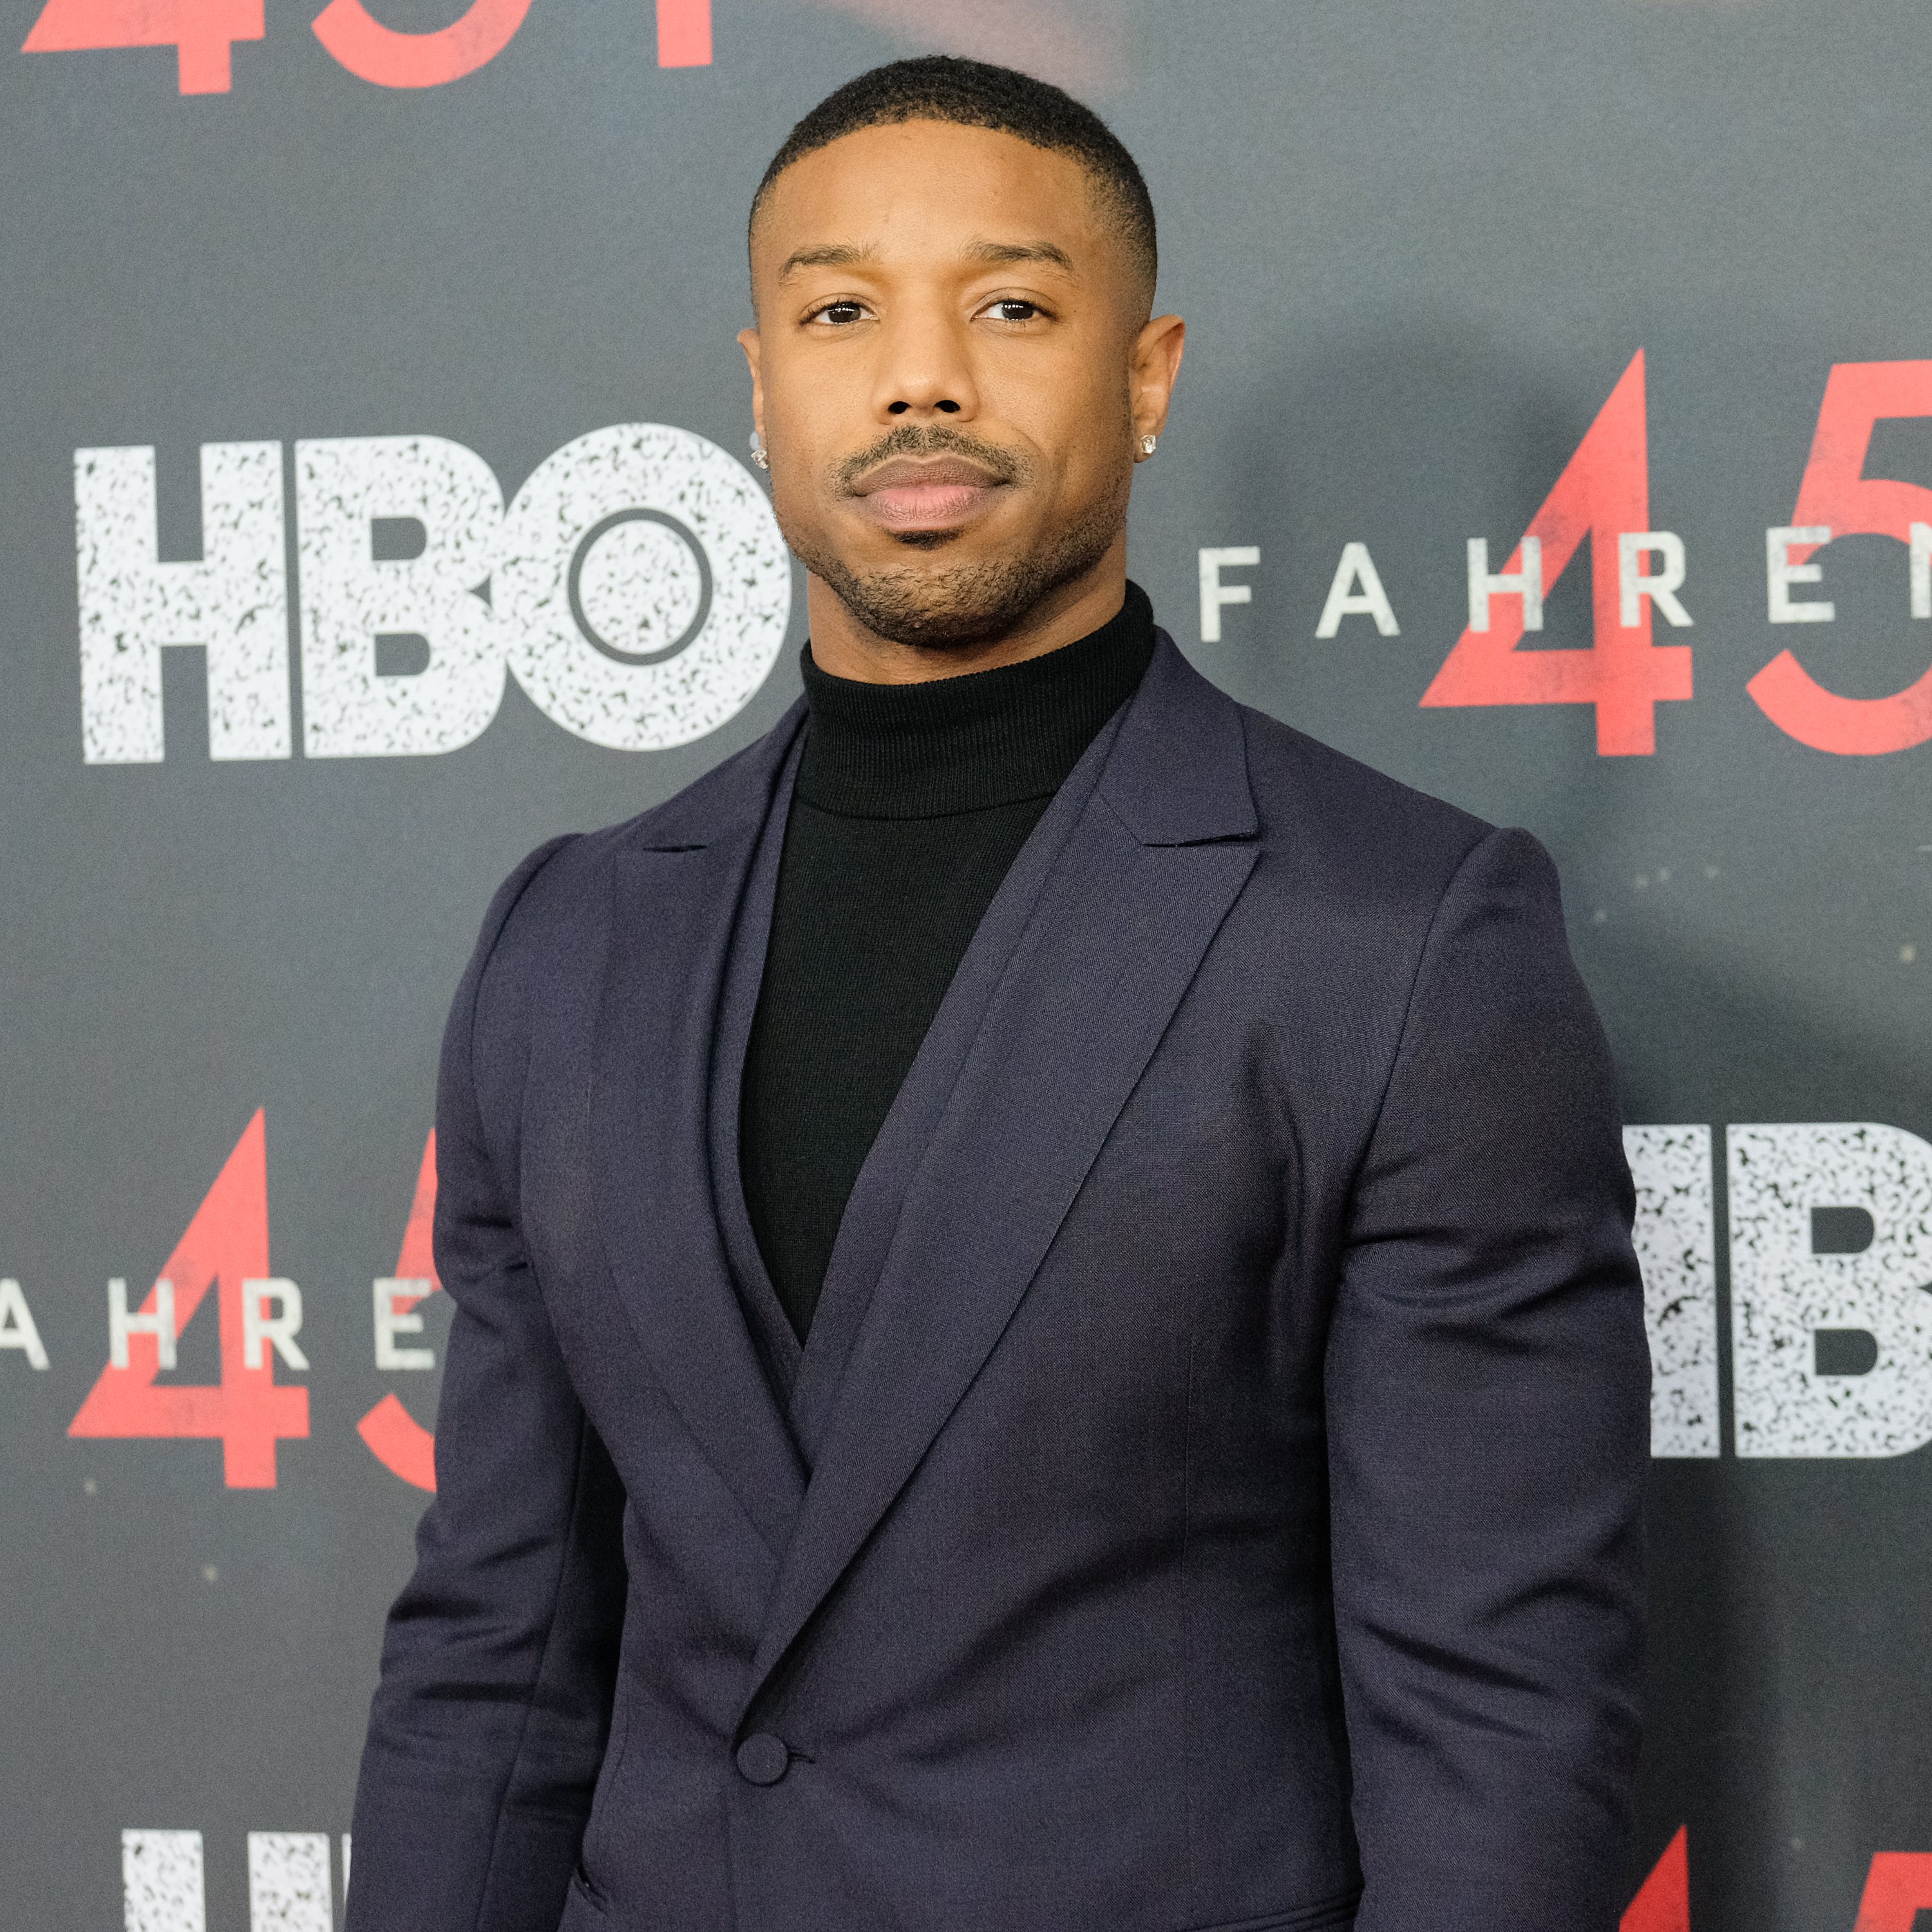 Michael B. Jordan at the "Fahrenheit 451" premiere on May 8, 2018 in New York City. | Source: Getty Images